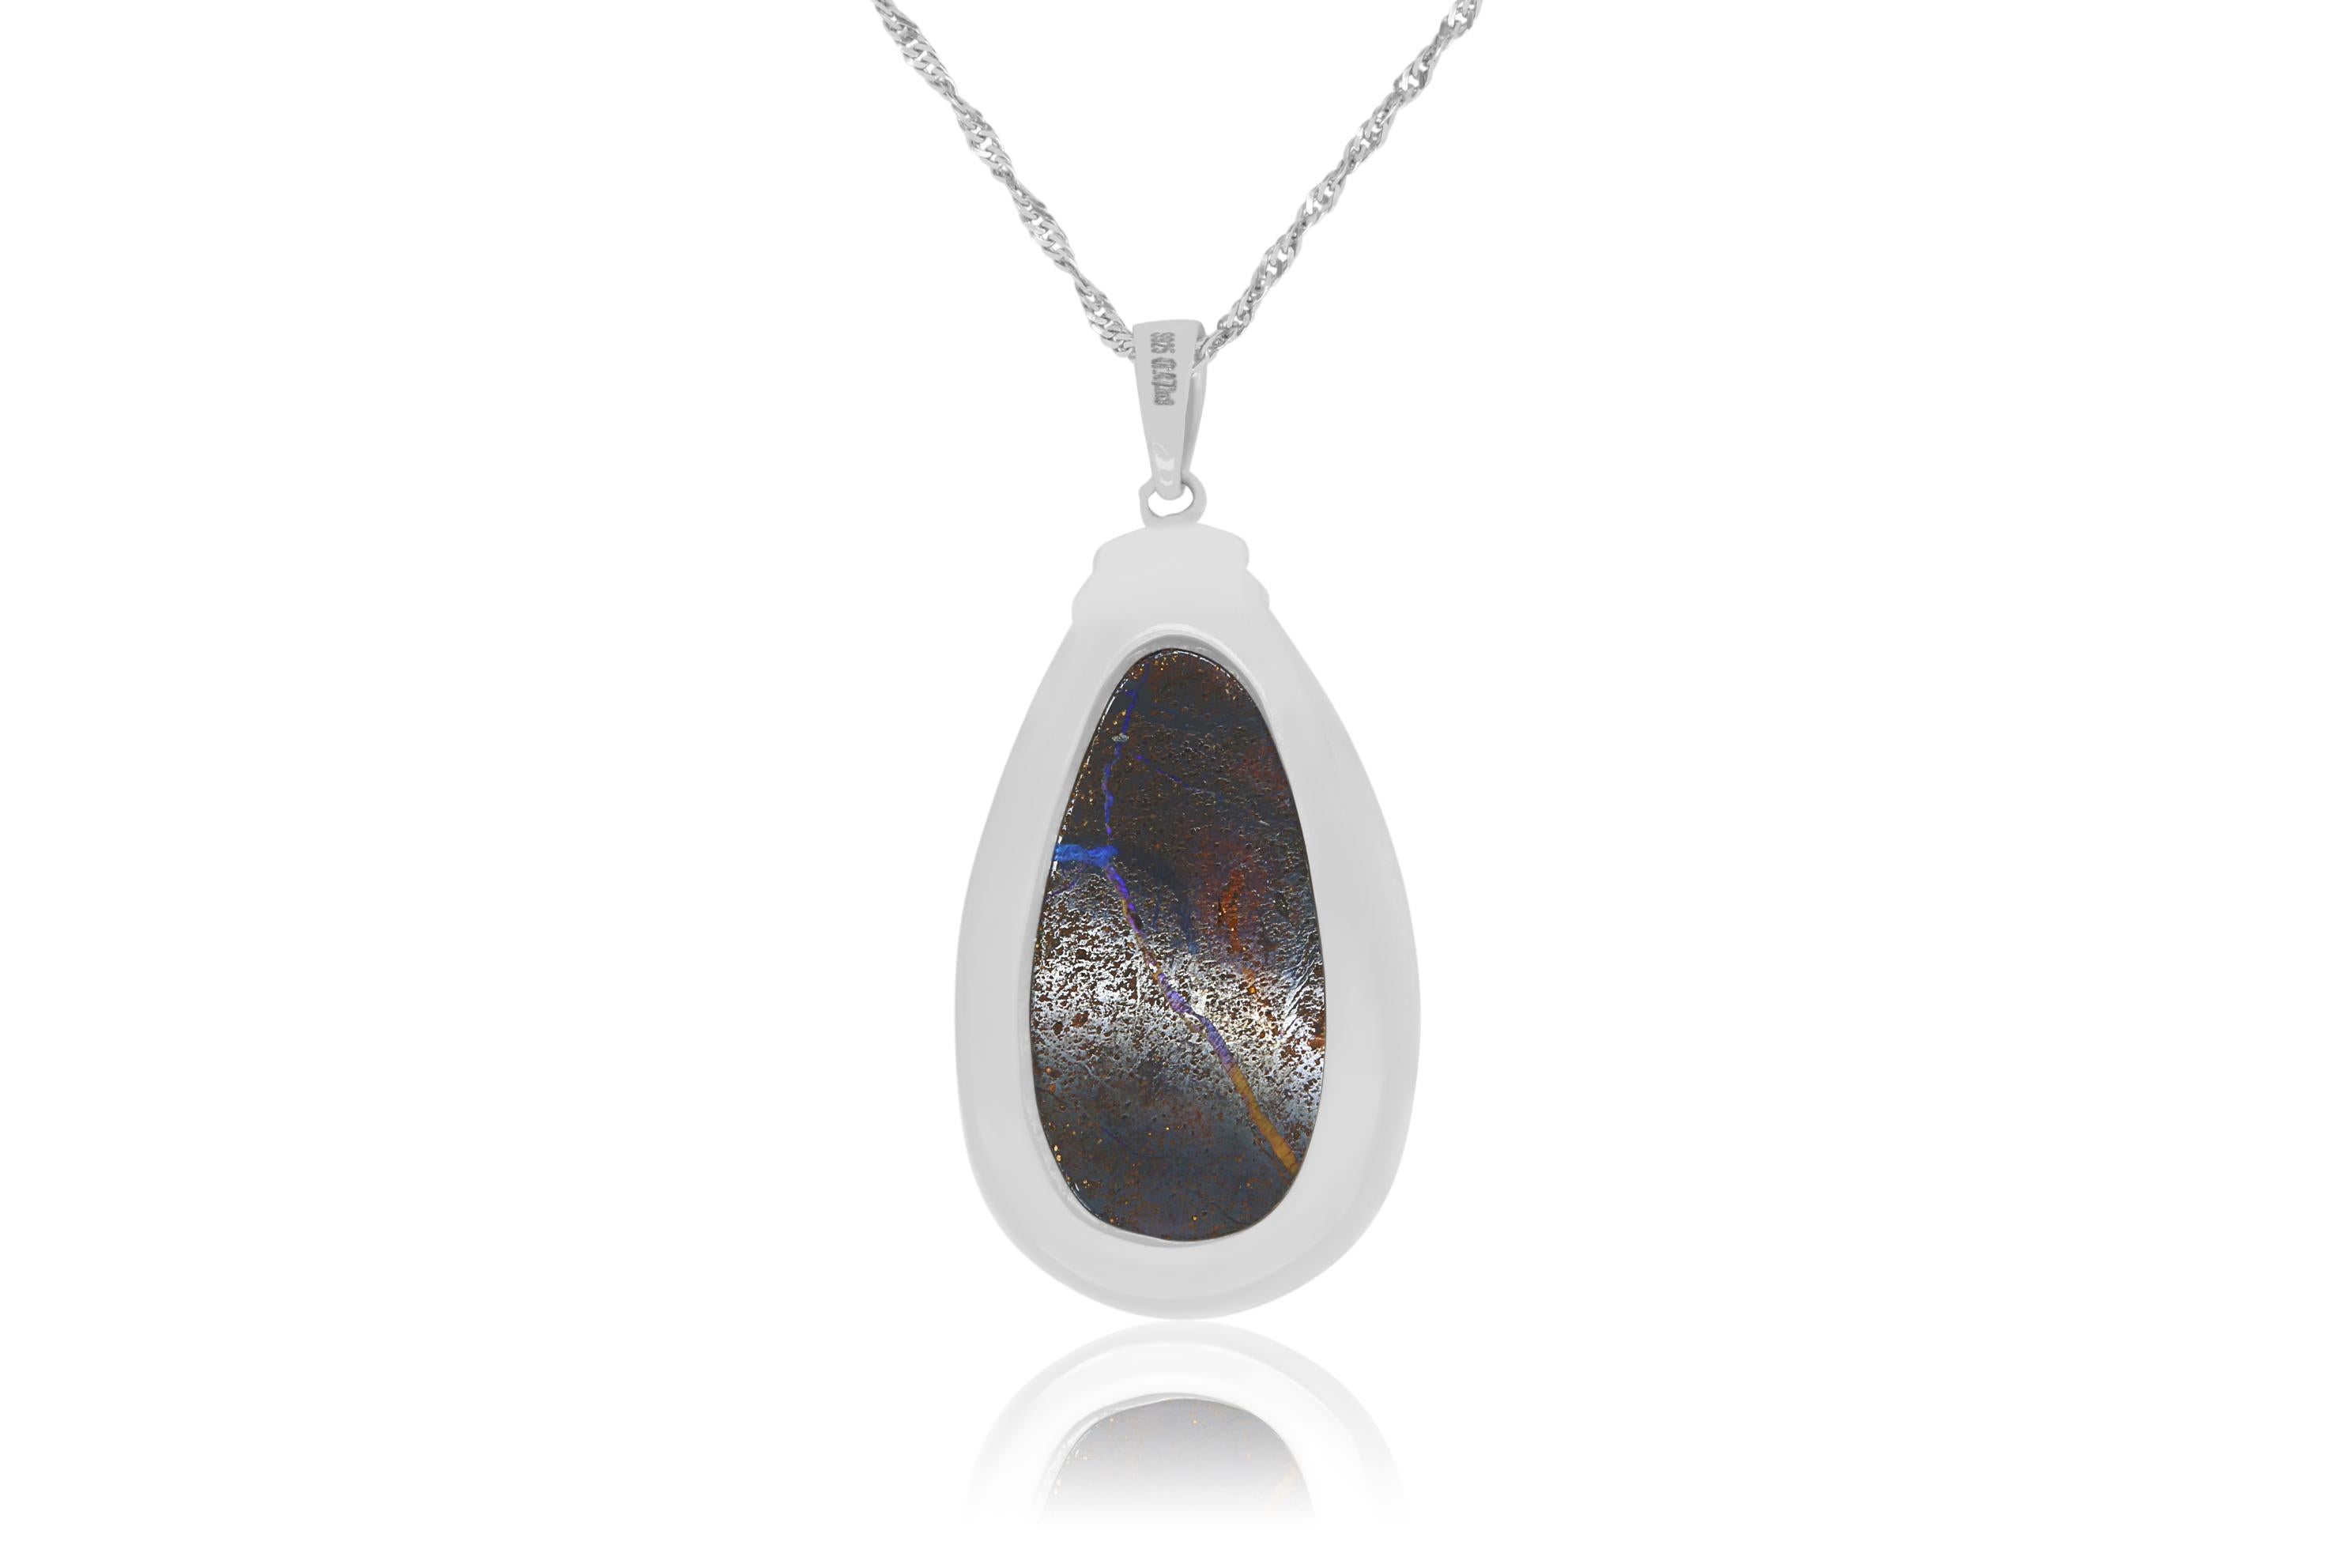 A unique piece, this Opal weighs in at 47.47 carats and is a true showstopper! 

Material: Silver
Center Stone Details: 1 Opal at 47.47 Carats
Chain:  18 inch

Fine one-of-a kind craftsmanship meets incredible quality in this breathtaking piece of